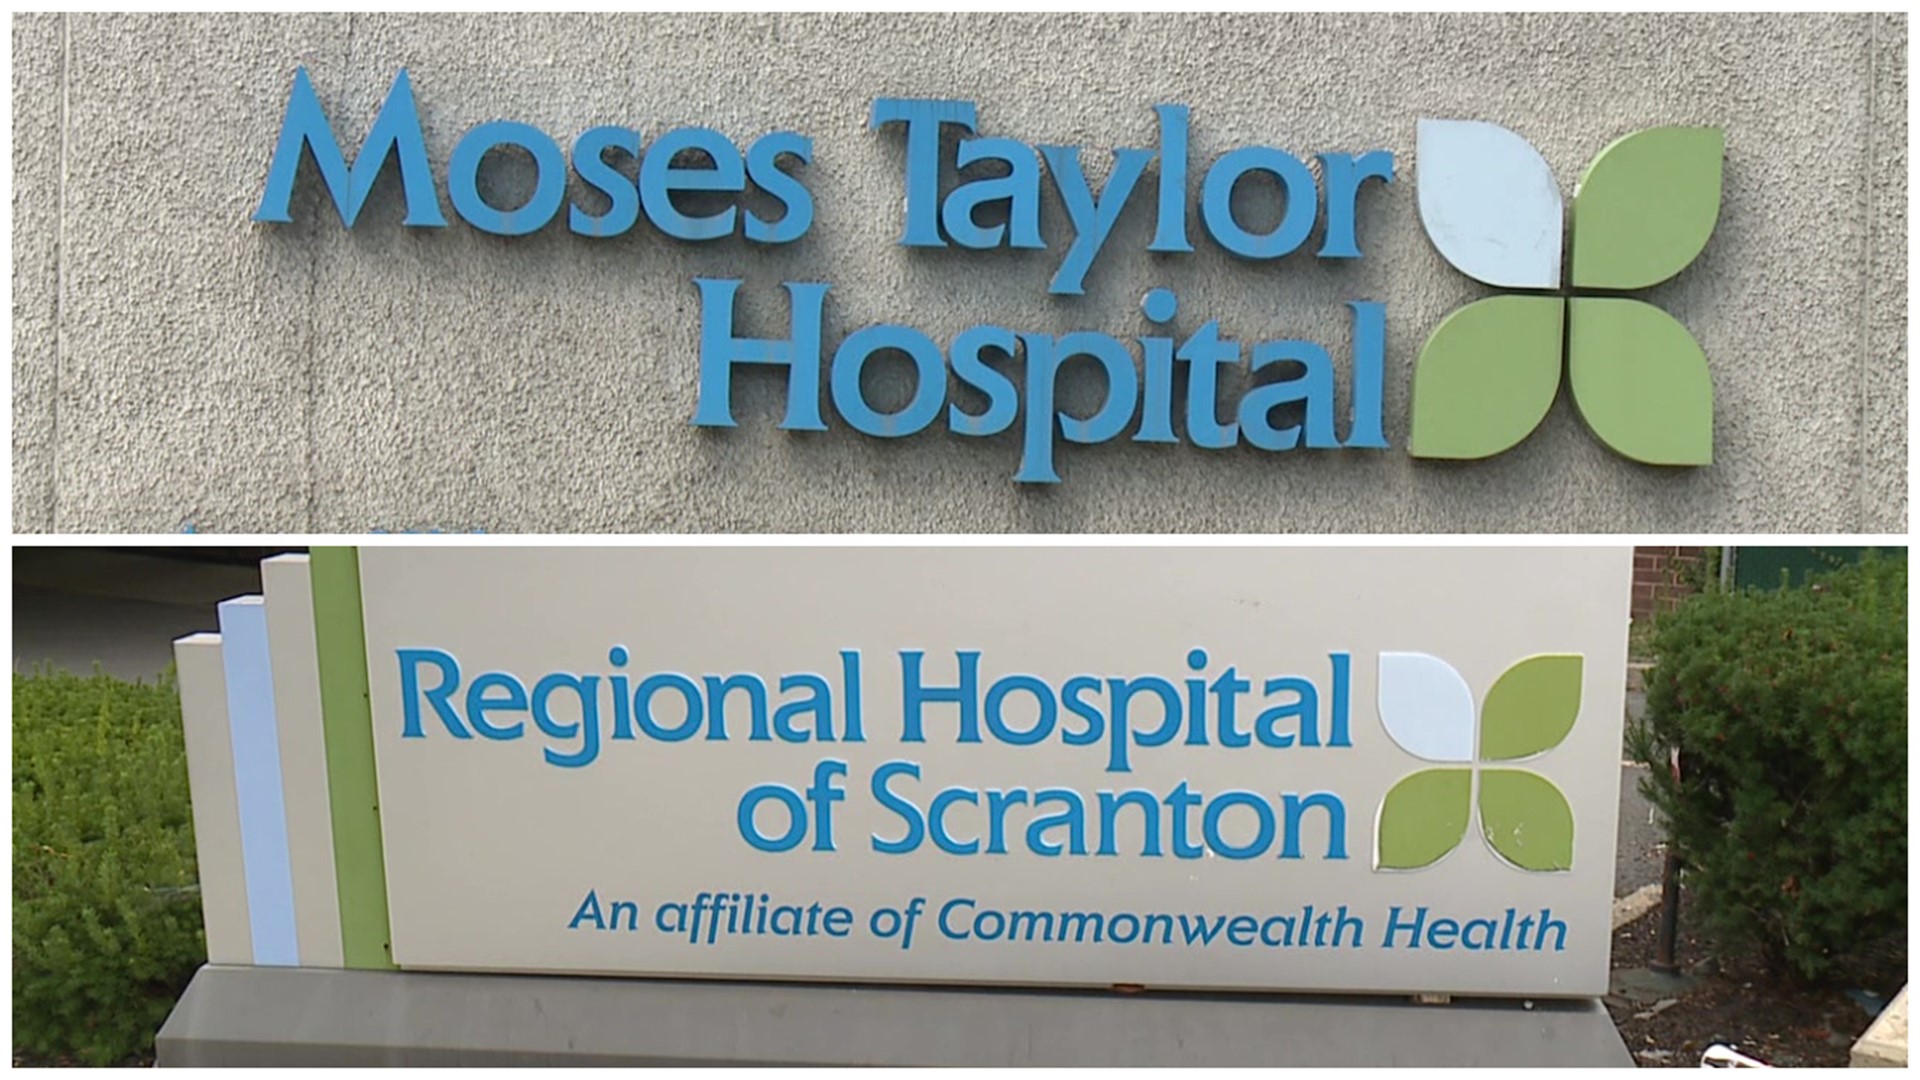 Commonwealth Health's Regional Hospital and Moses Taylor Hospital will consolidate operations later this year, if approved by the state.